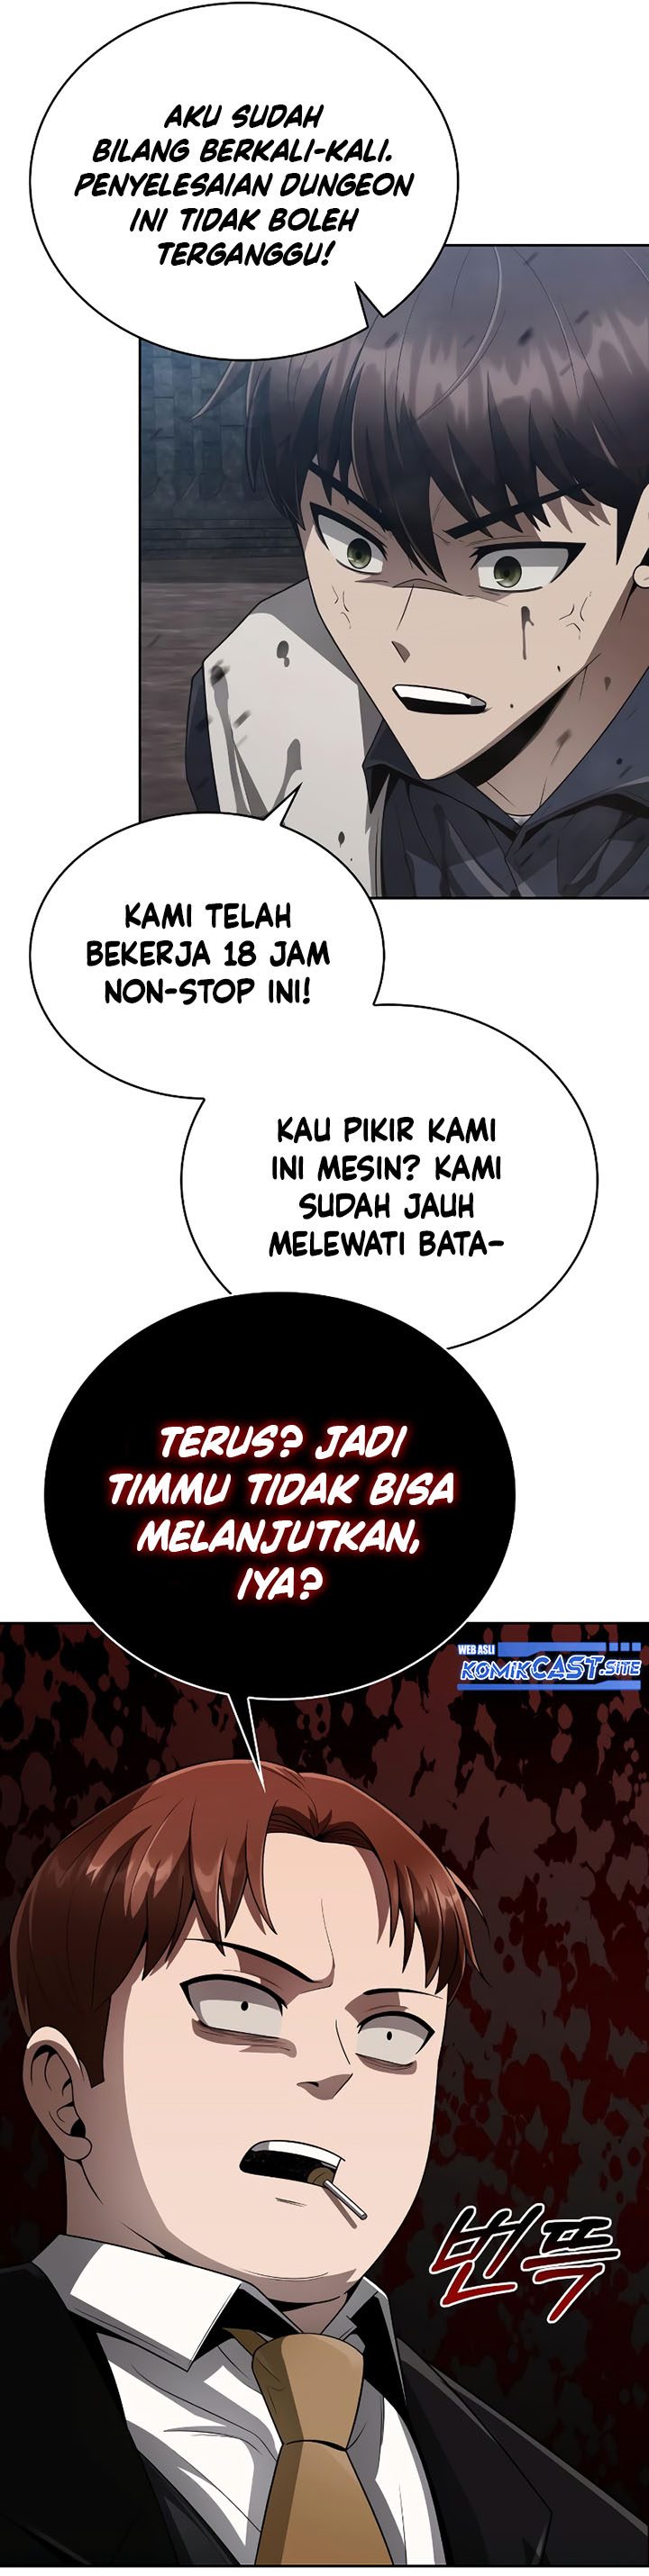 Dilarang COPAS - situs resmi www.mangacanblog.com - Komik clever cleaning life of the returned genius hunter 016 - chapter 16 17 Indonesia clever cleaning life of the returned genius hunter 016 - chapter 16 Terbaru 22|Baca Manga Komik Indonesia|Mangacan